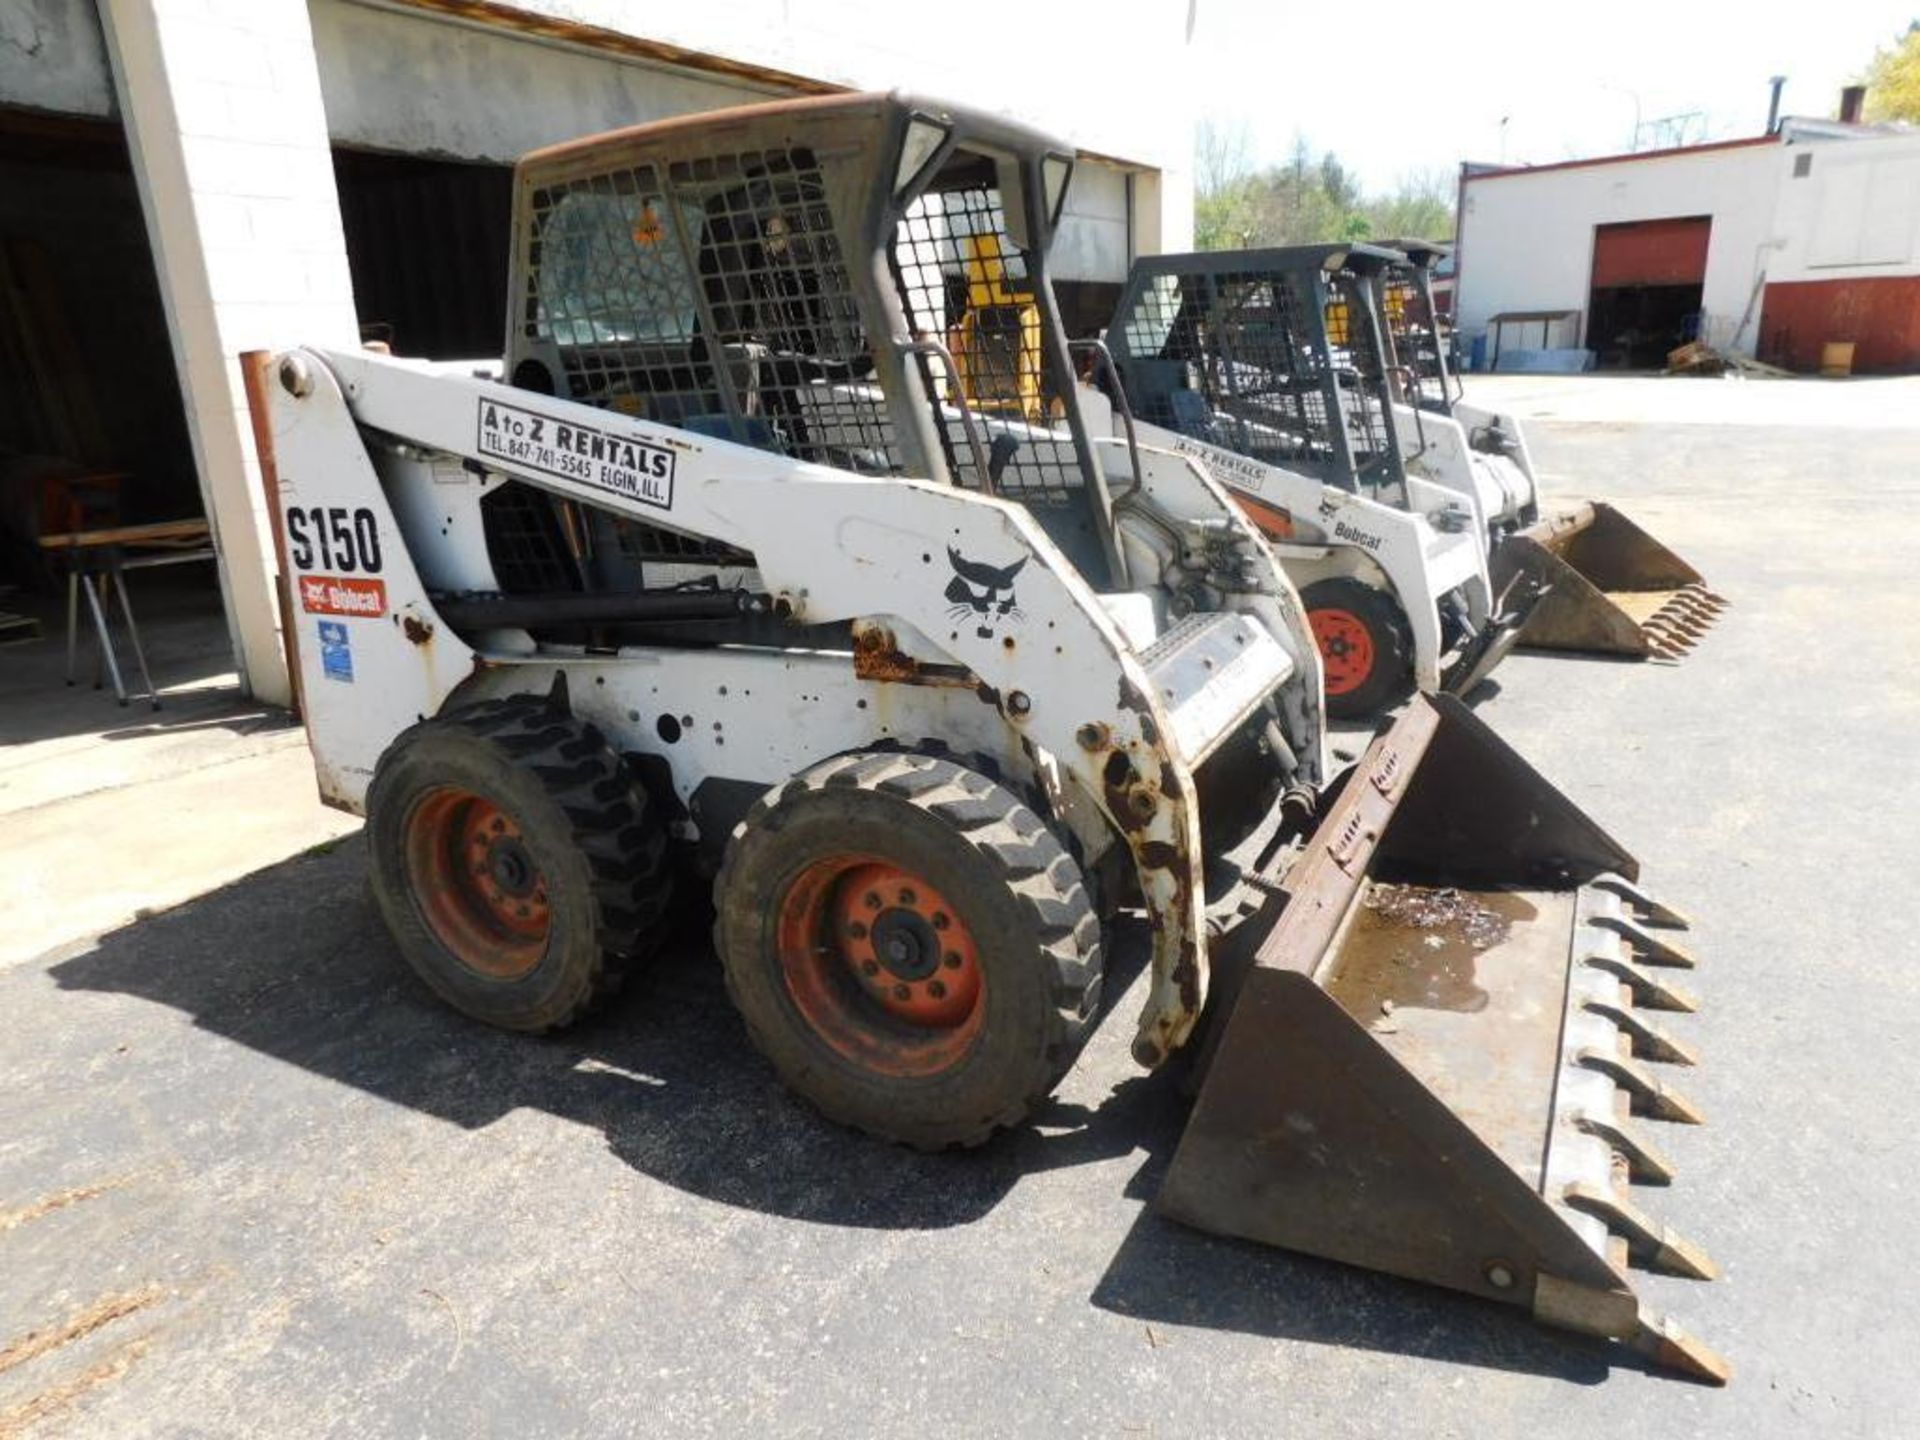 2007 Bobcat S150 Skid Steer Loader, 67" Removable Tooth Bucket, Rubber Tire, Diesel, 2677 Hours Indi - Image 2 of 10